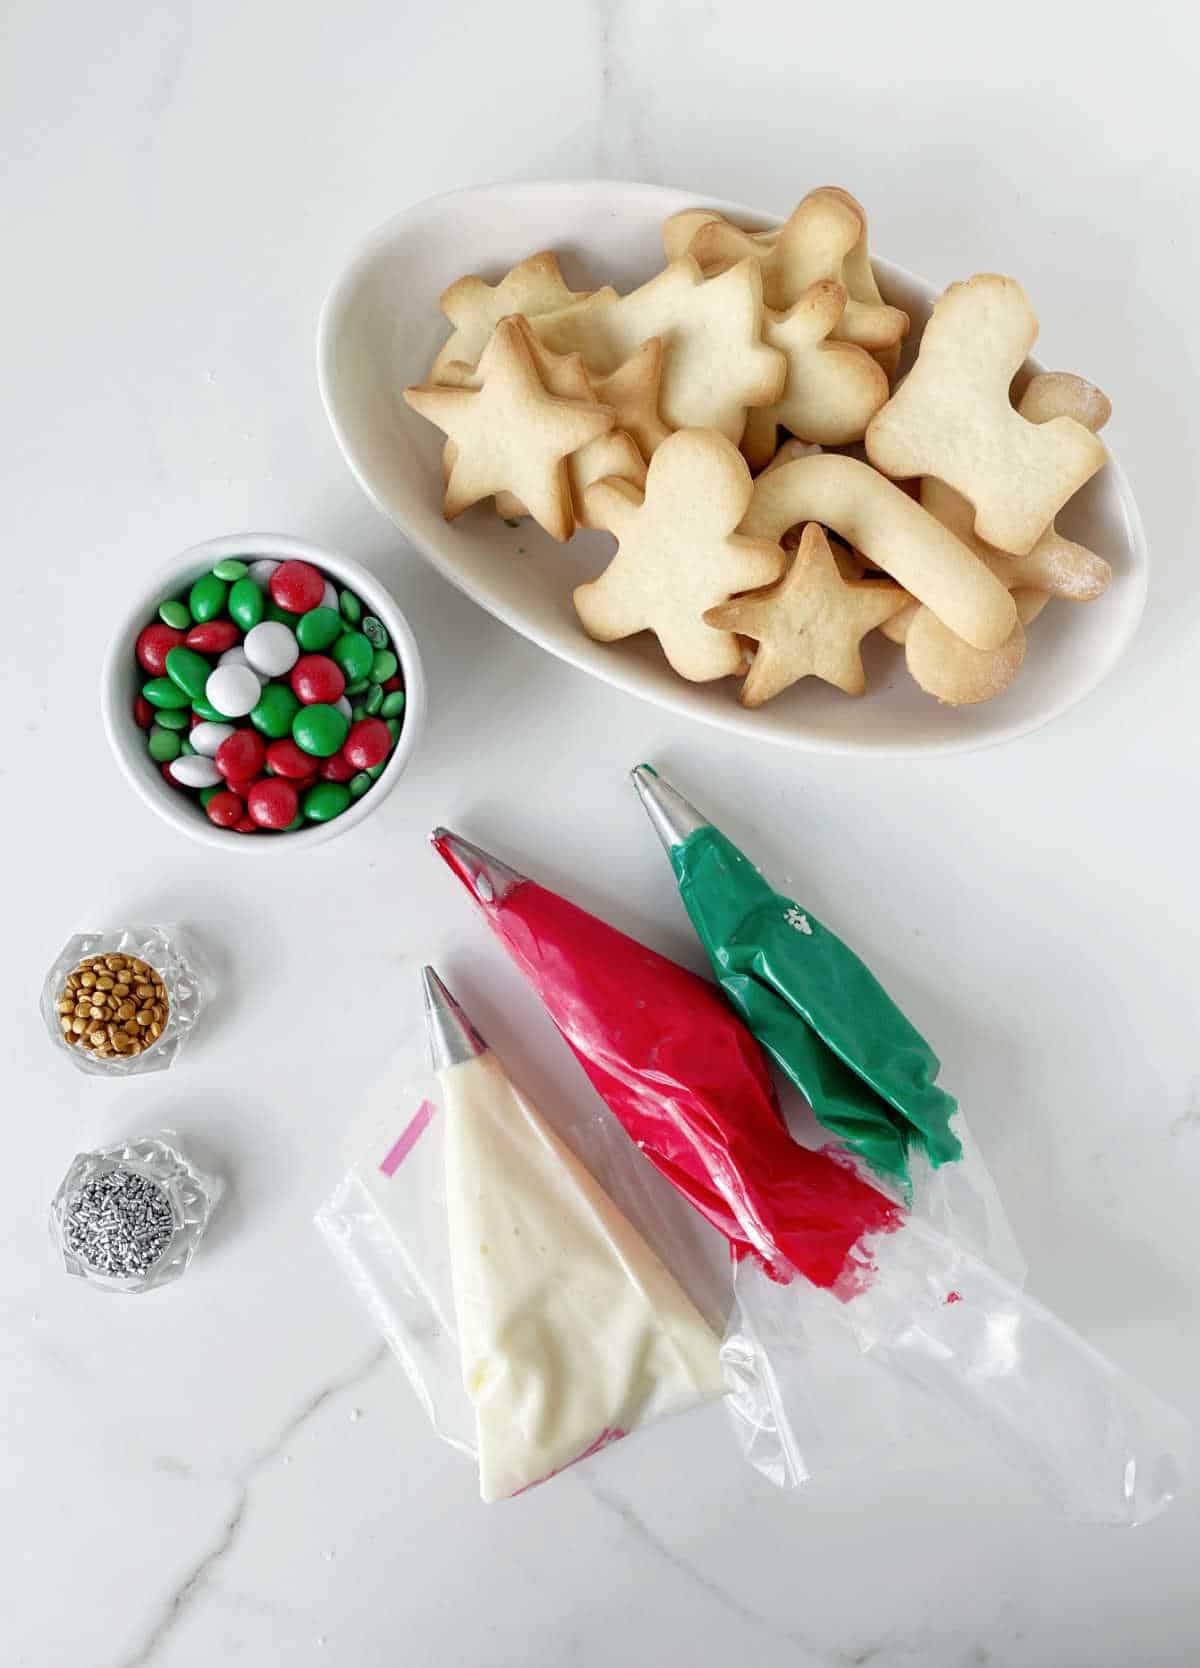 Piping bags with Christmas colored frosting, bowl with sugar cookies, sprinkles. White marbled surface.